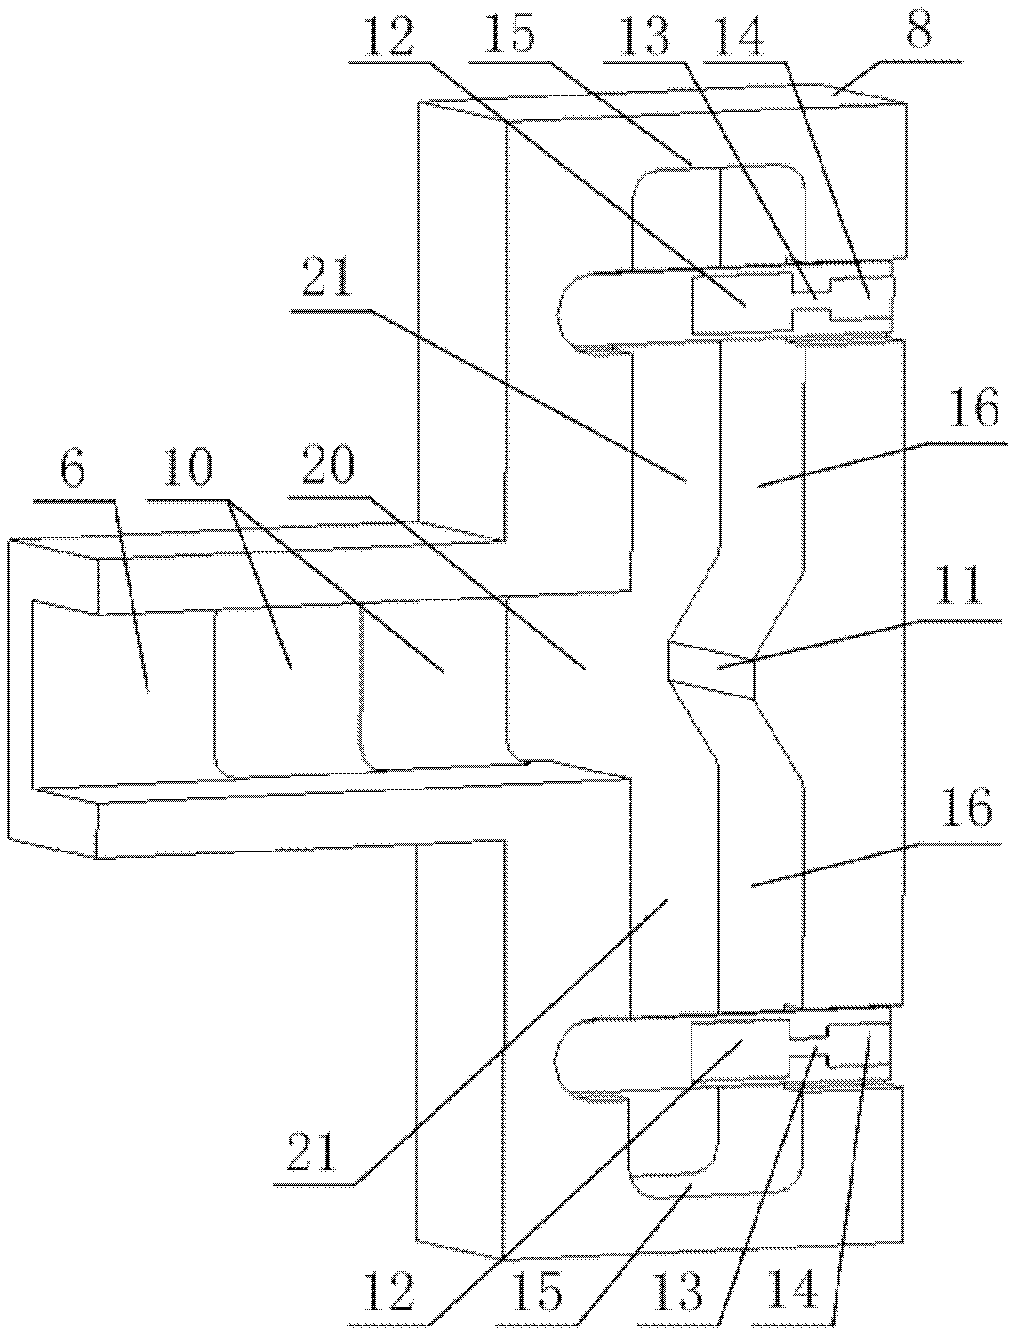 Millimeter wave ultra-wideband spatial power combining network